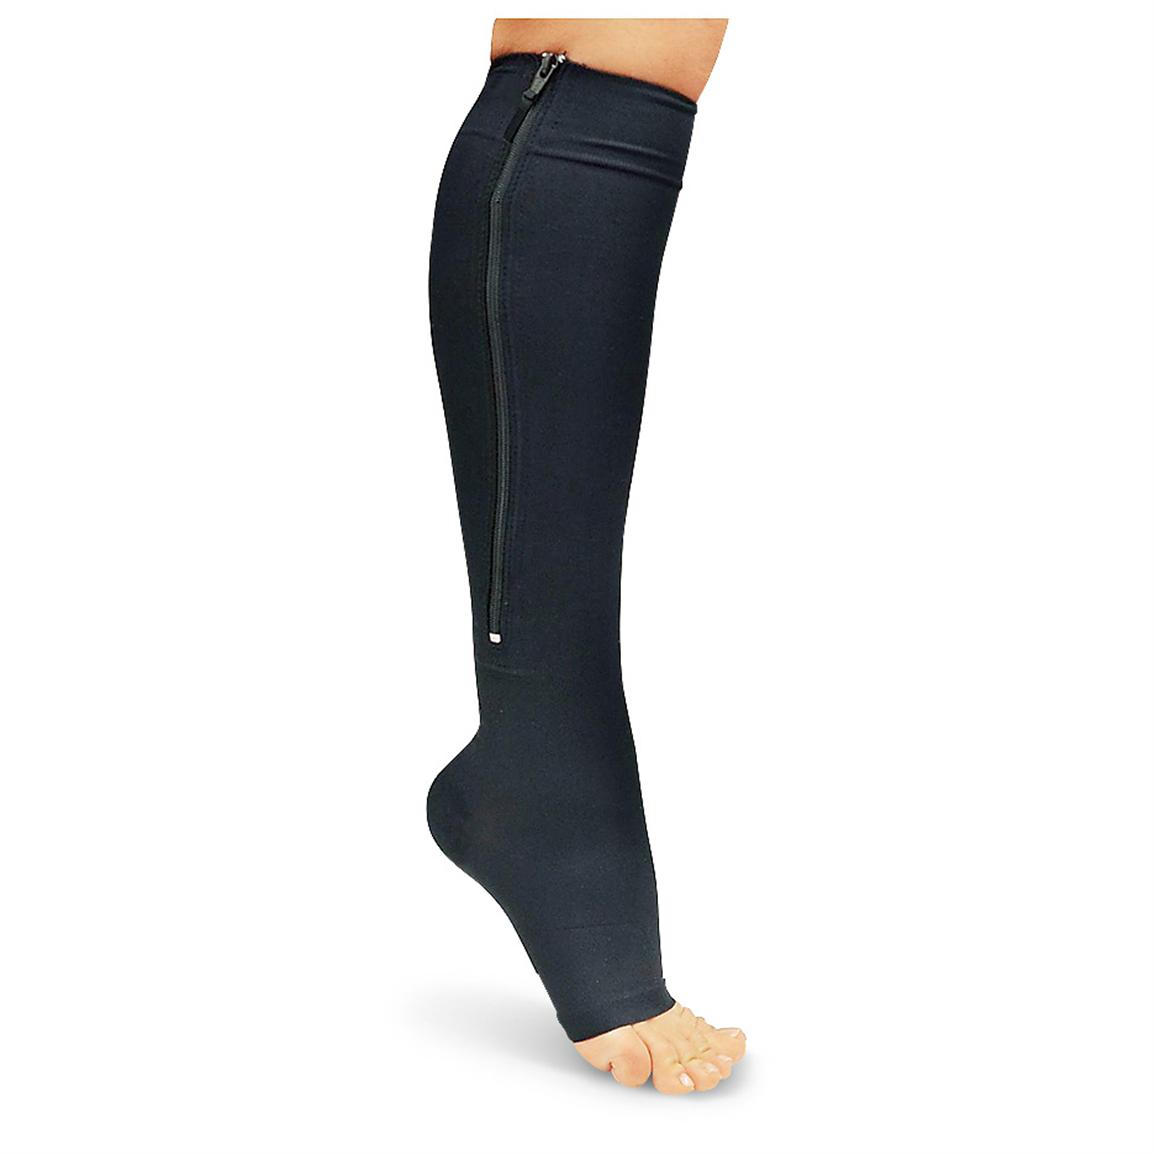 Compression socks for women with zipper